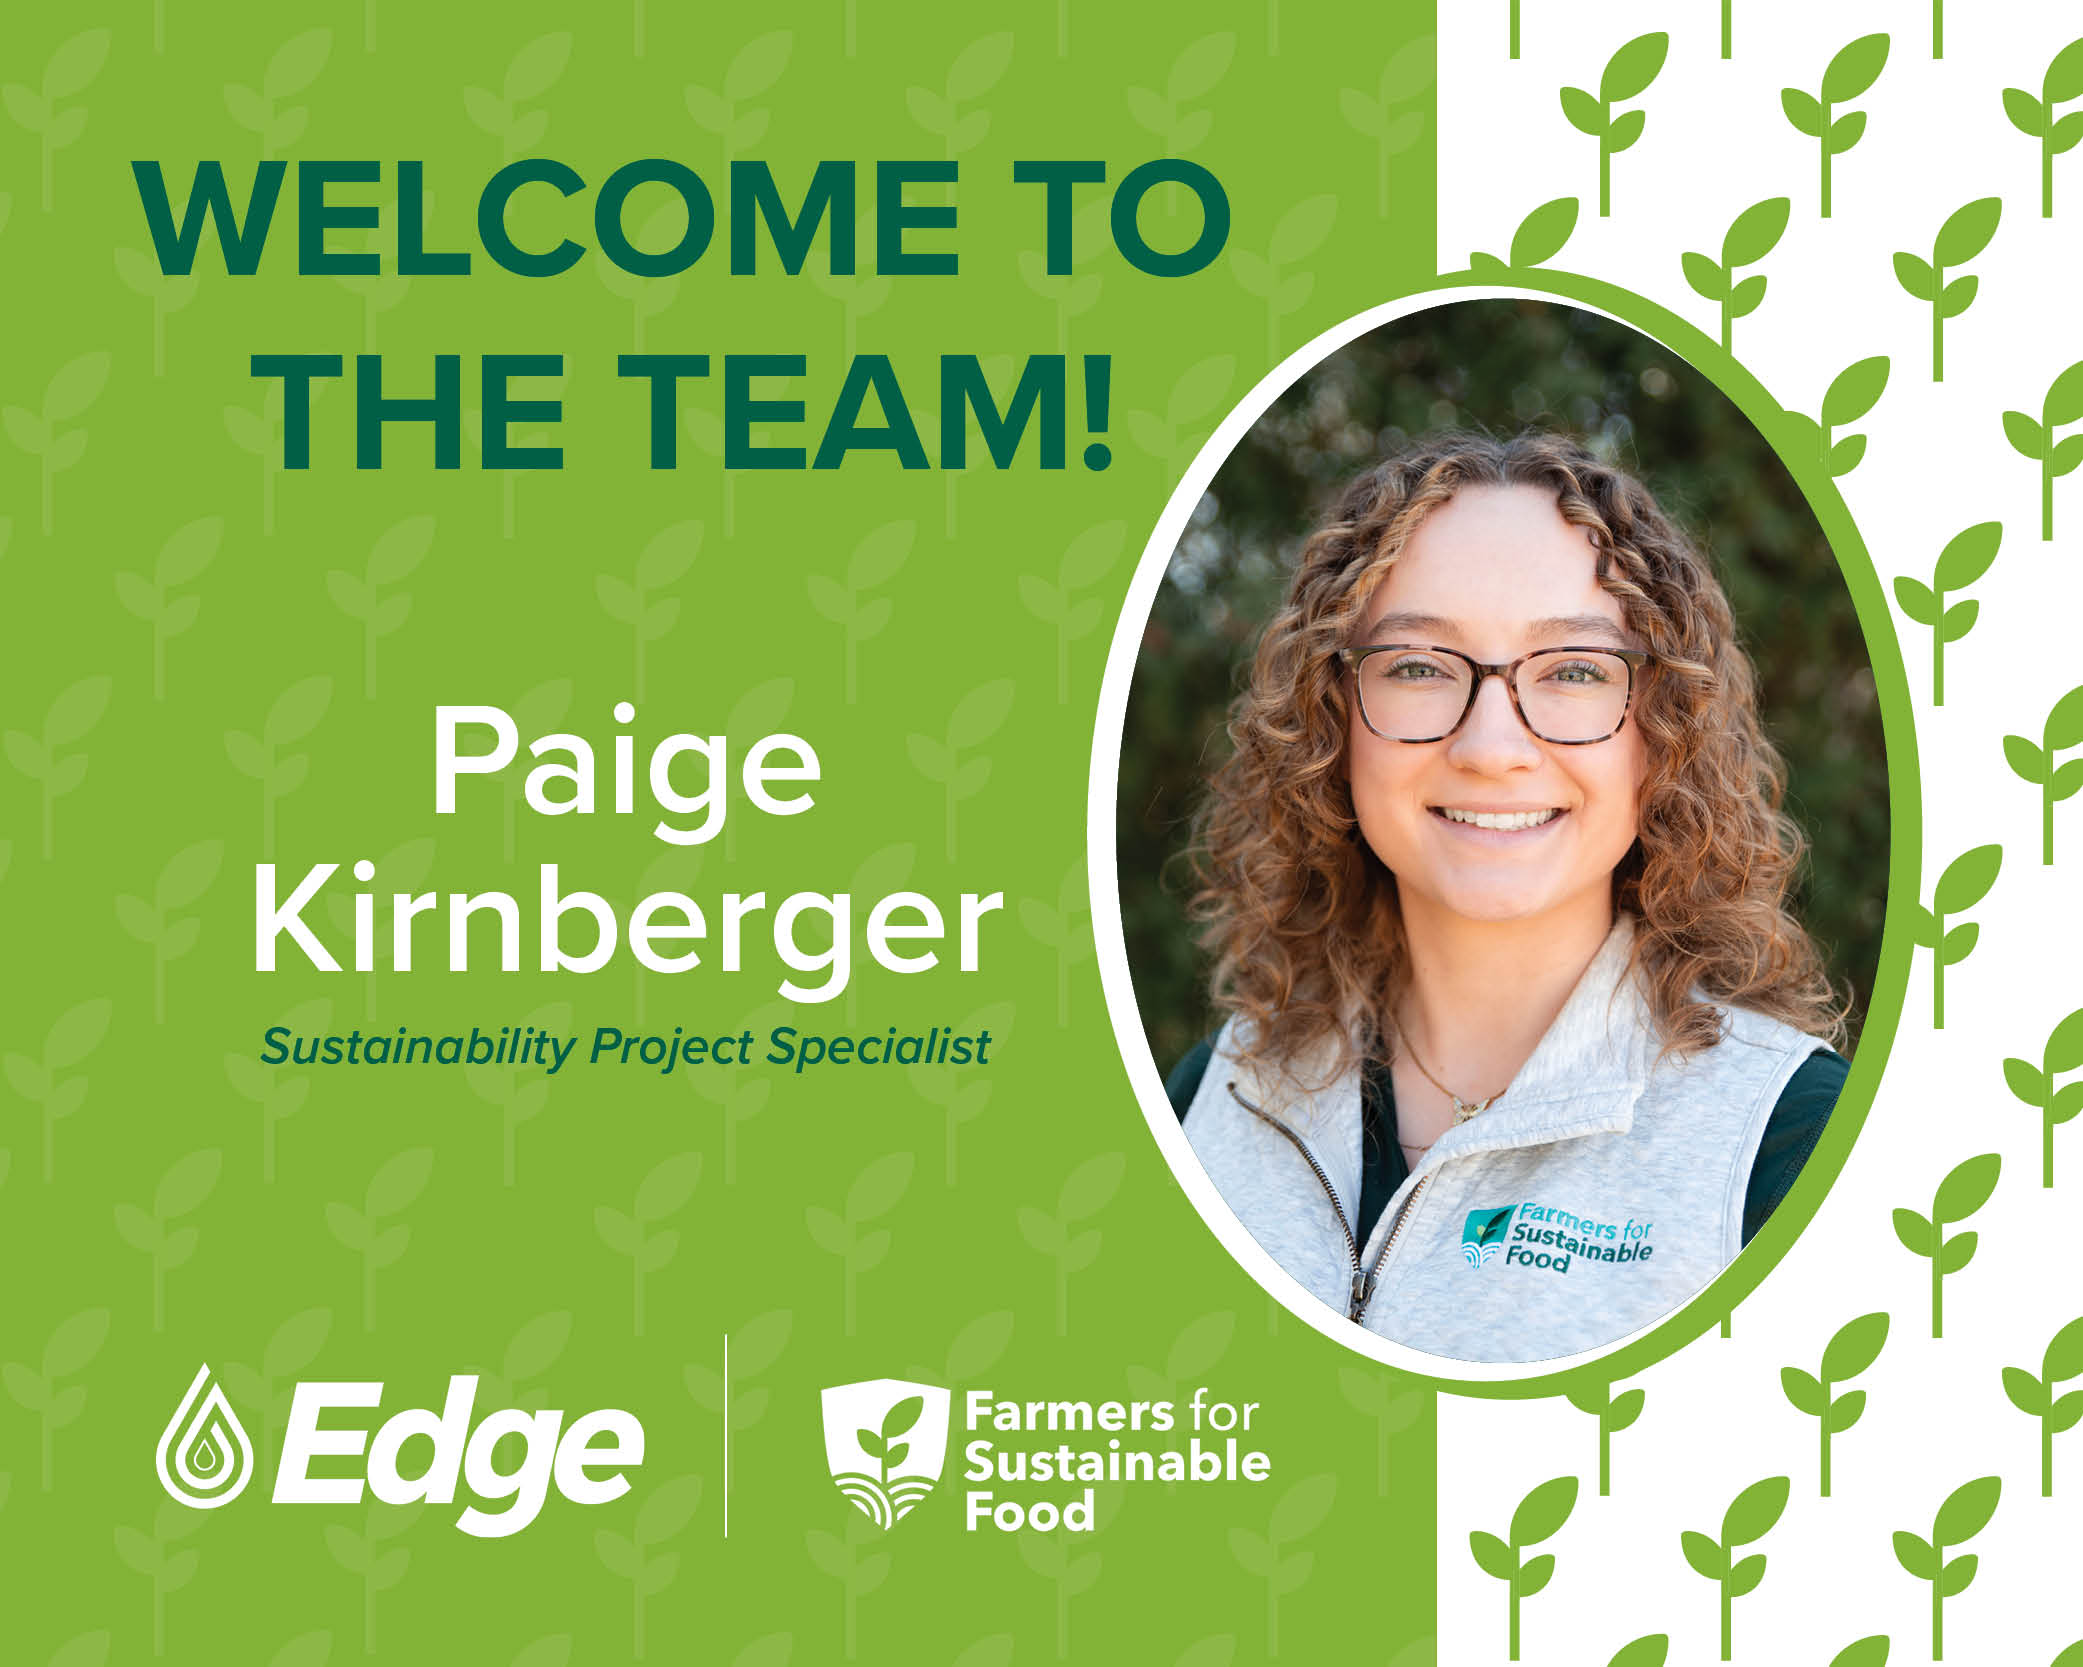 Kirnberger will support farmers’ Climate-Smart projects as part of Edge